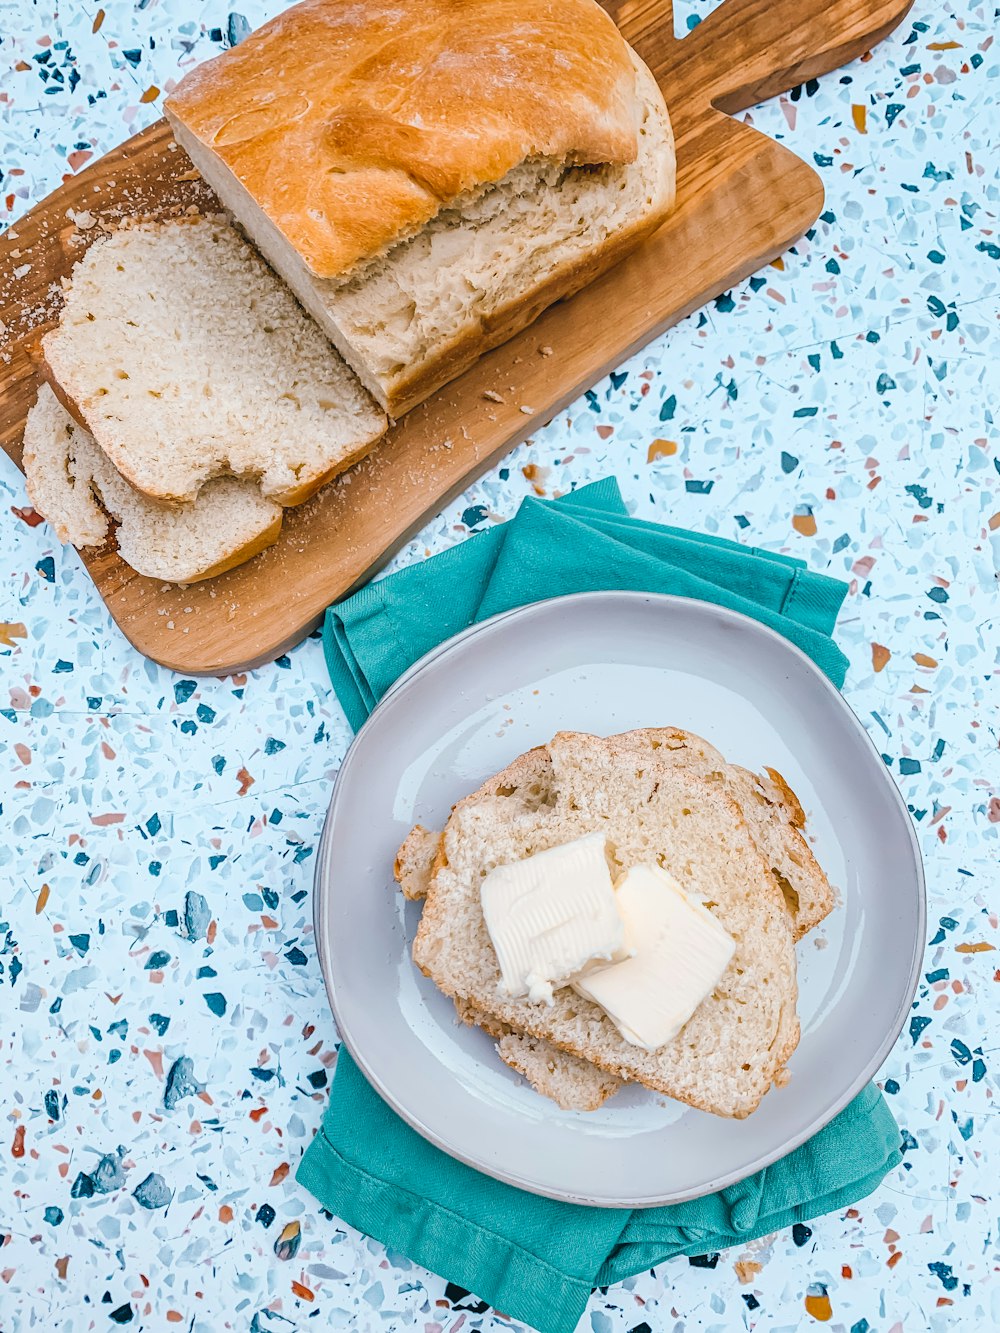 Bread And Butter Pictures  Download Free Images on Unsplash